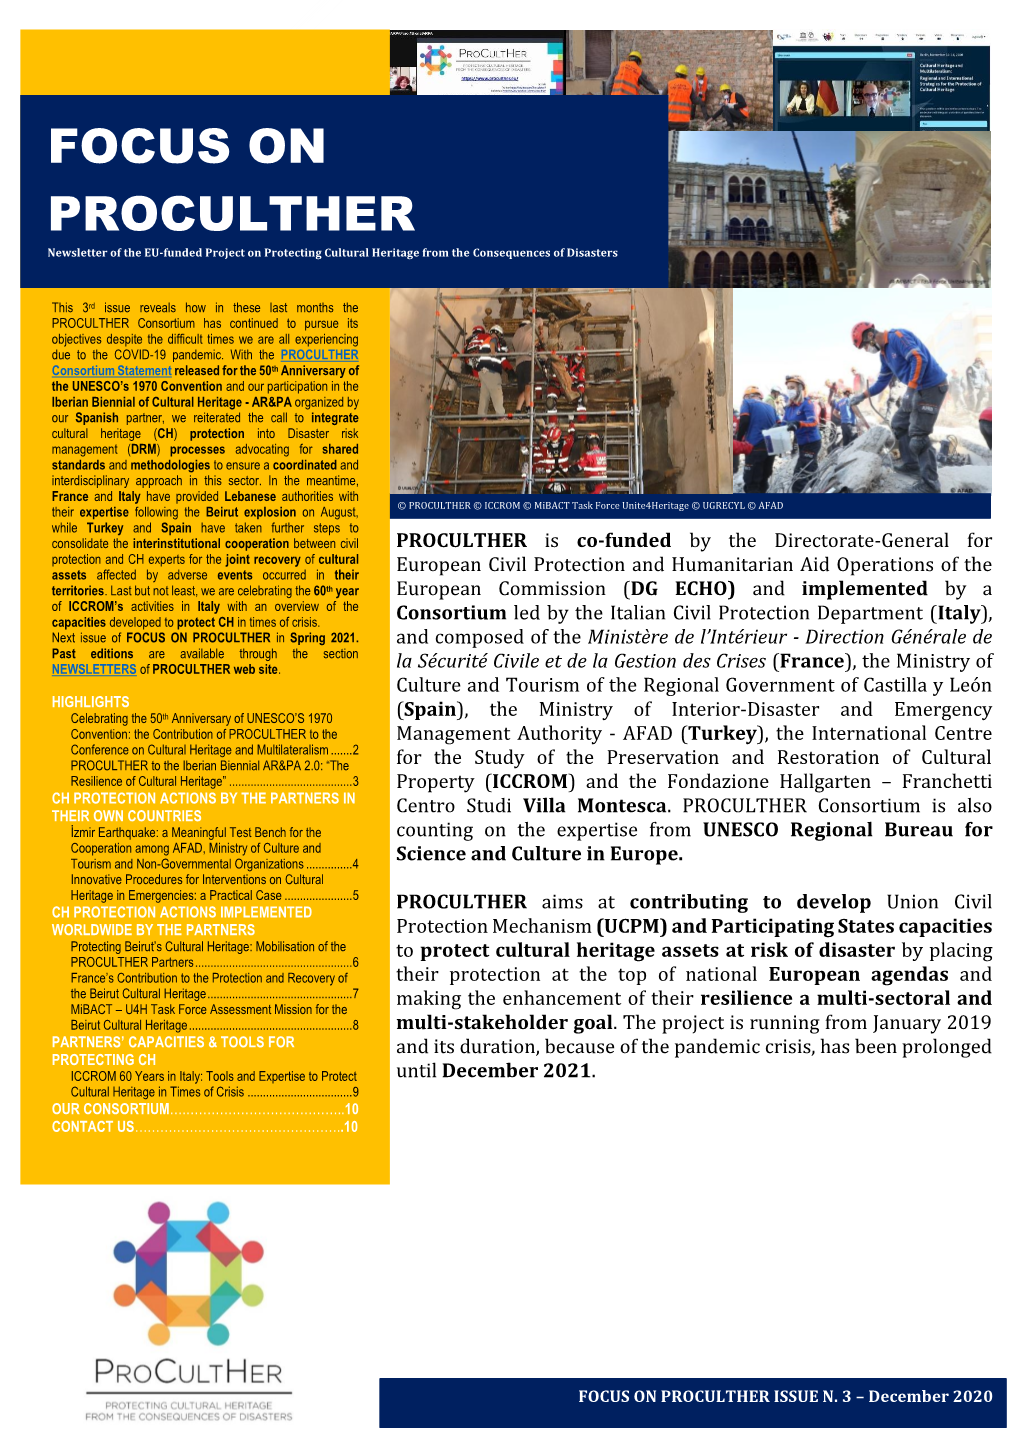 FOCUS on PROCULTHER Newsletter of the EU-Funded Project on Protecting Cultural Heritage from the Consequences of Disasters